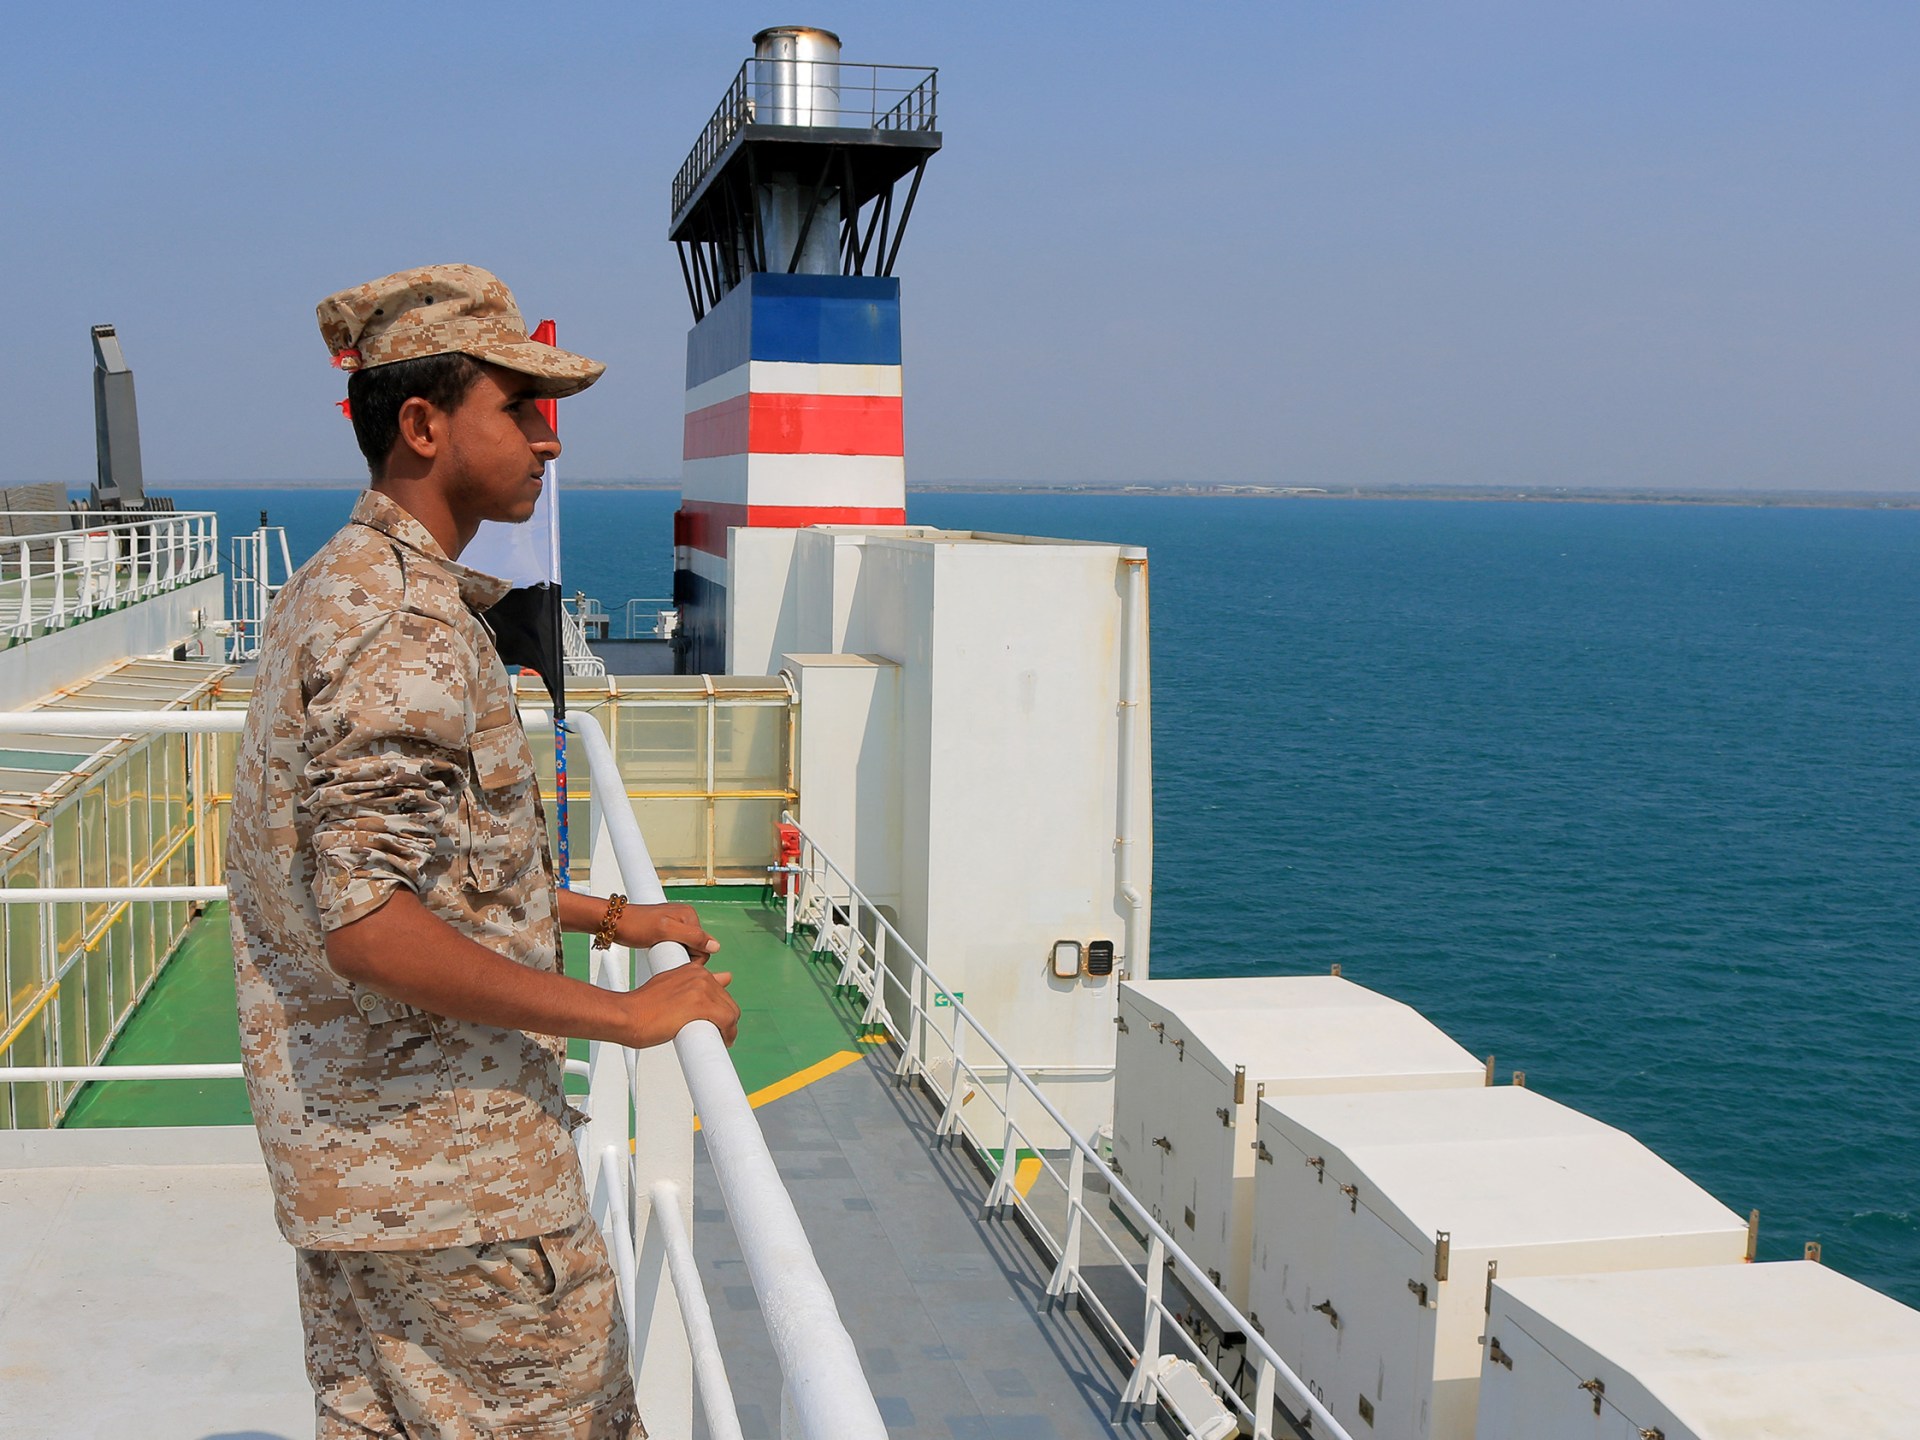 UN Security Council demands Houthis stop Red Sea shipping attacks | Houthis News